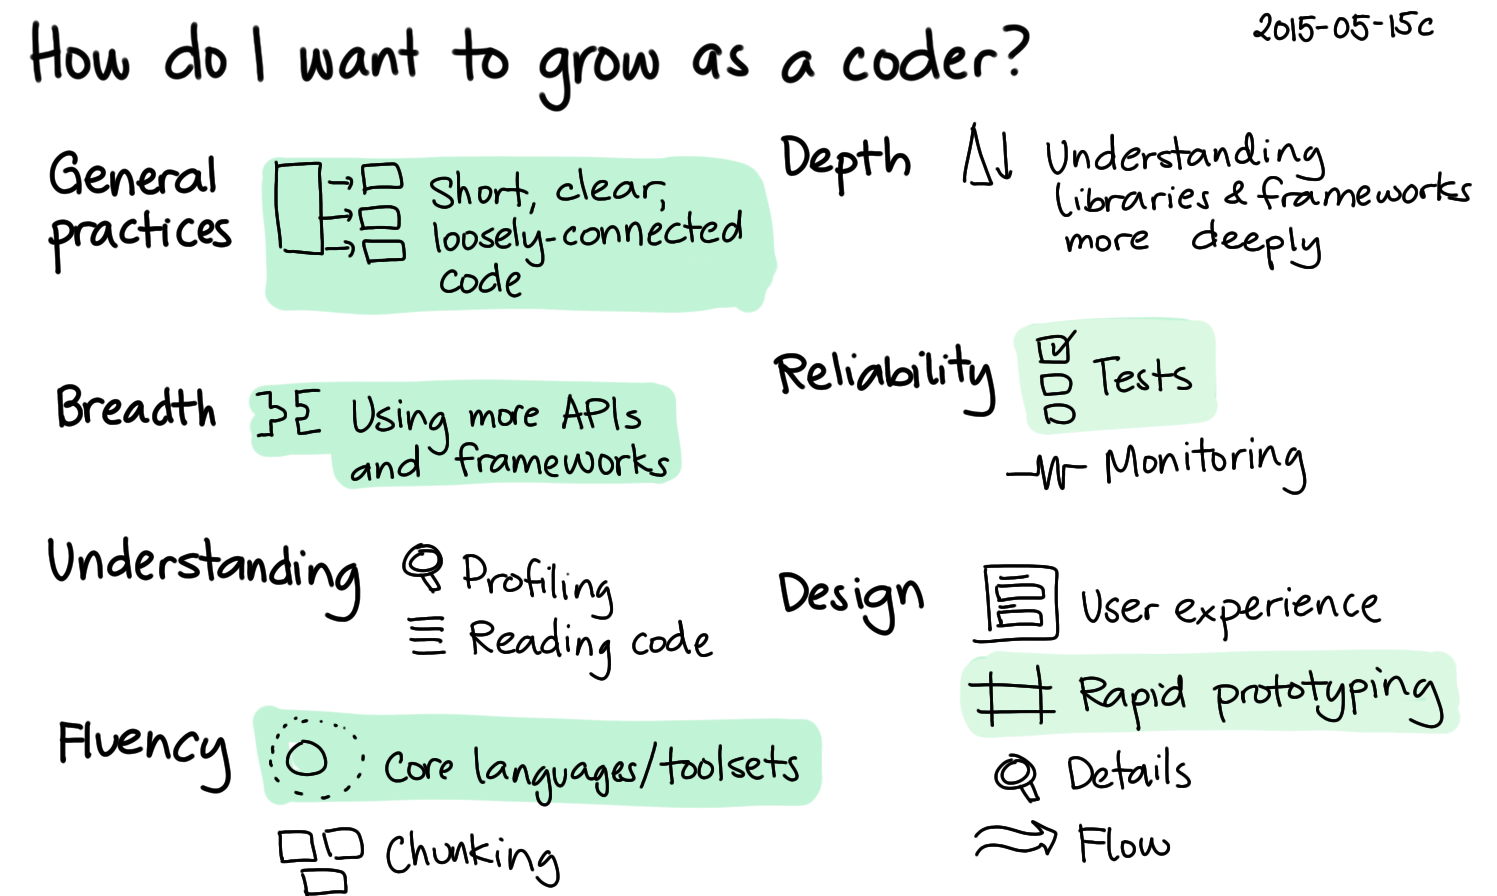 2015-05-15c How do I want to grow as a coder -- #coding #growth #plans.png